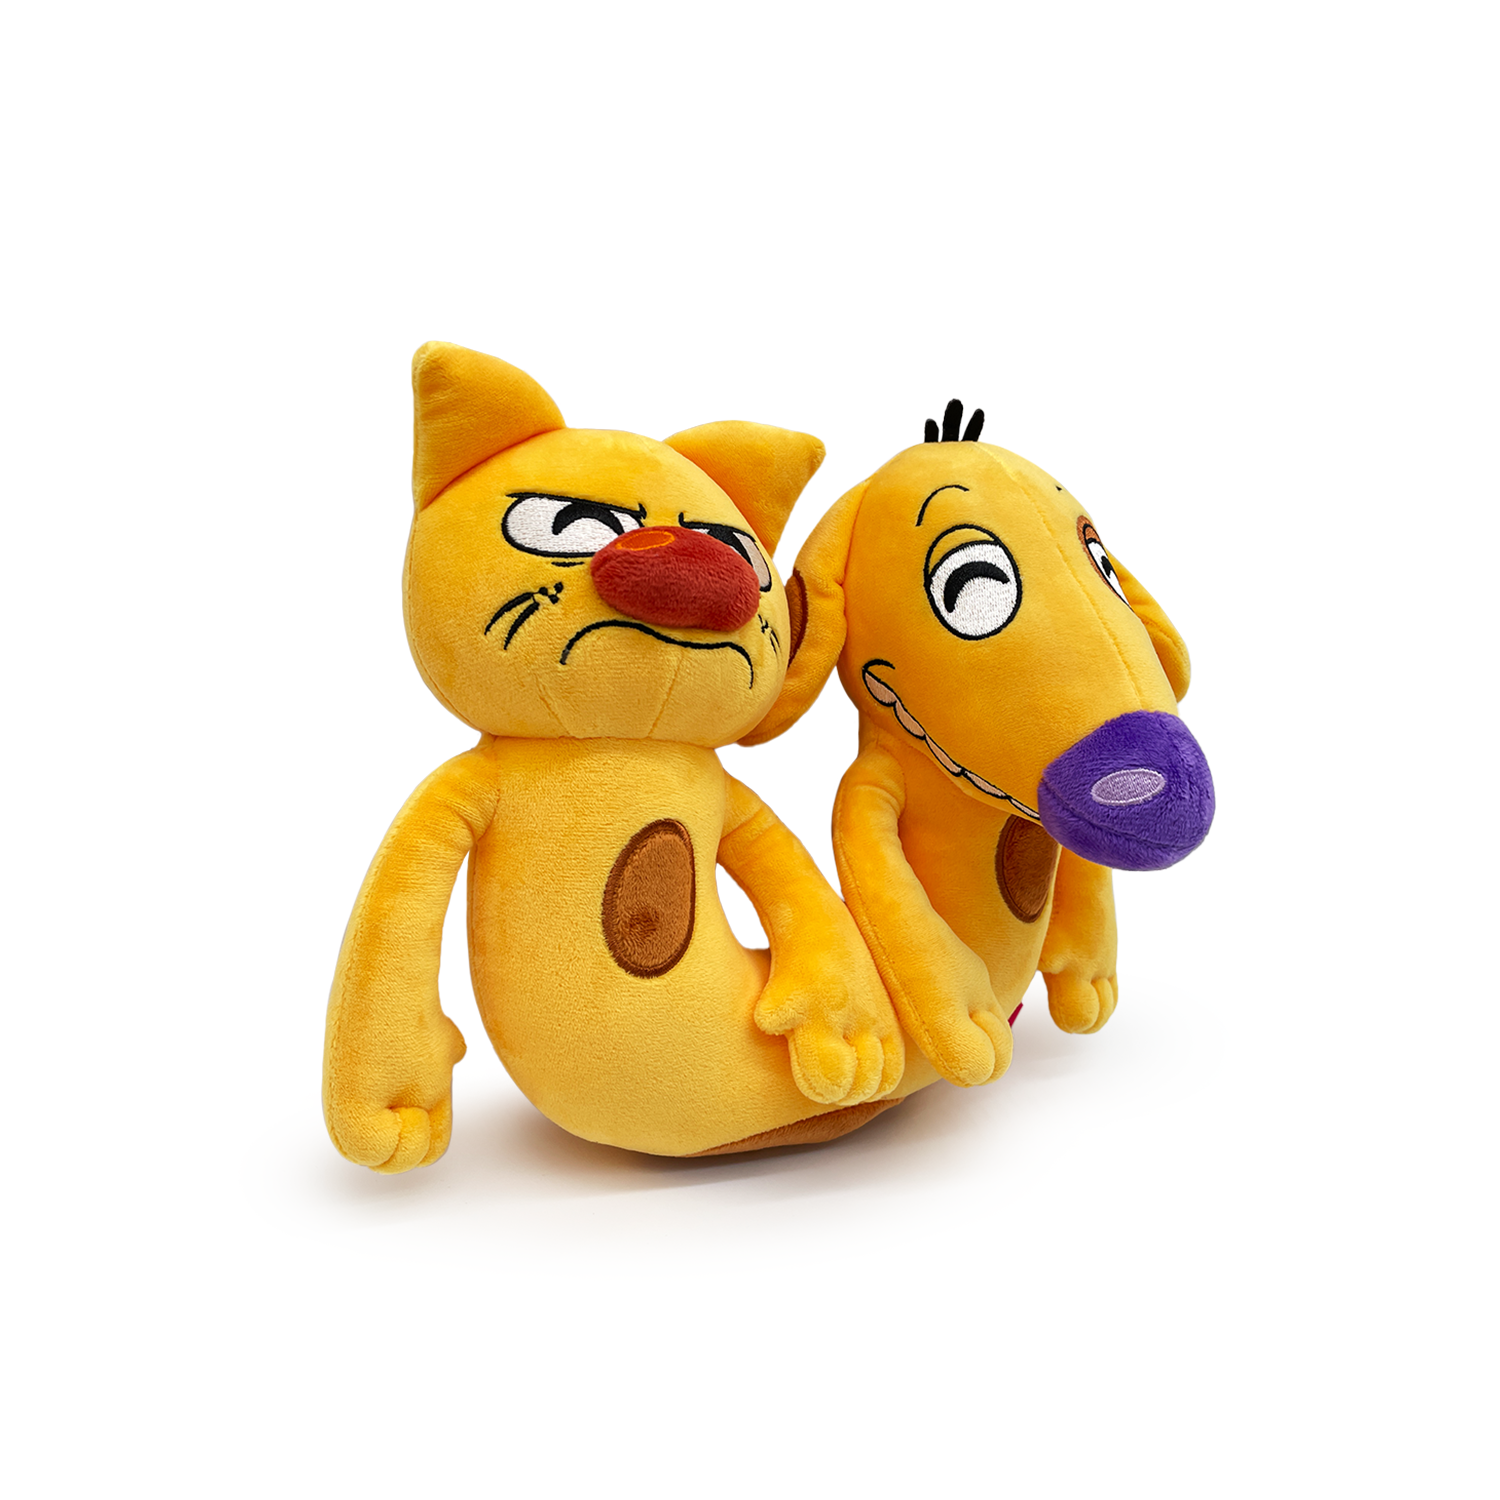 CatDog plush toys! I Want These Guys Cuz They're Also From That